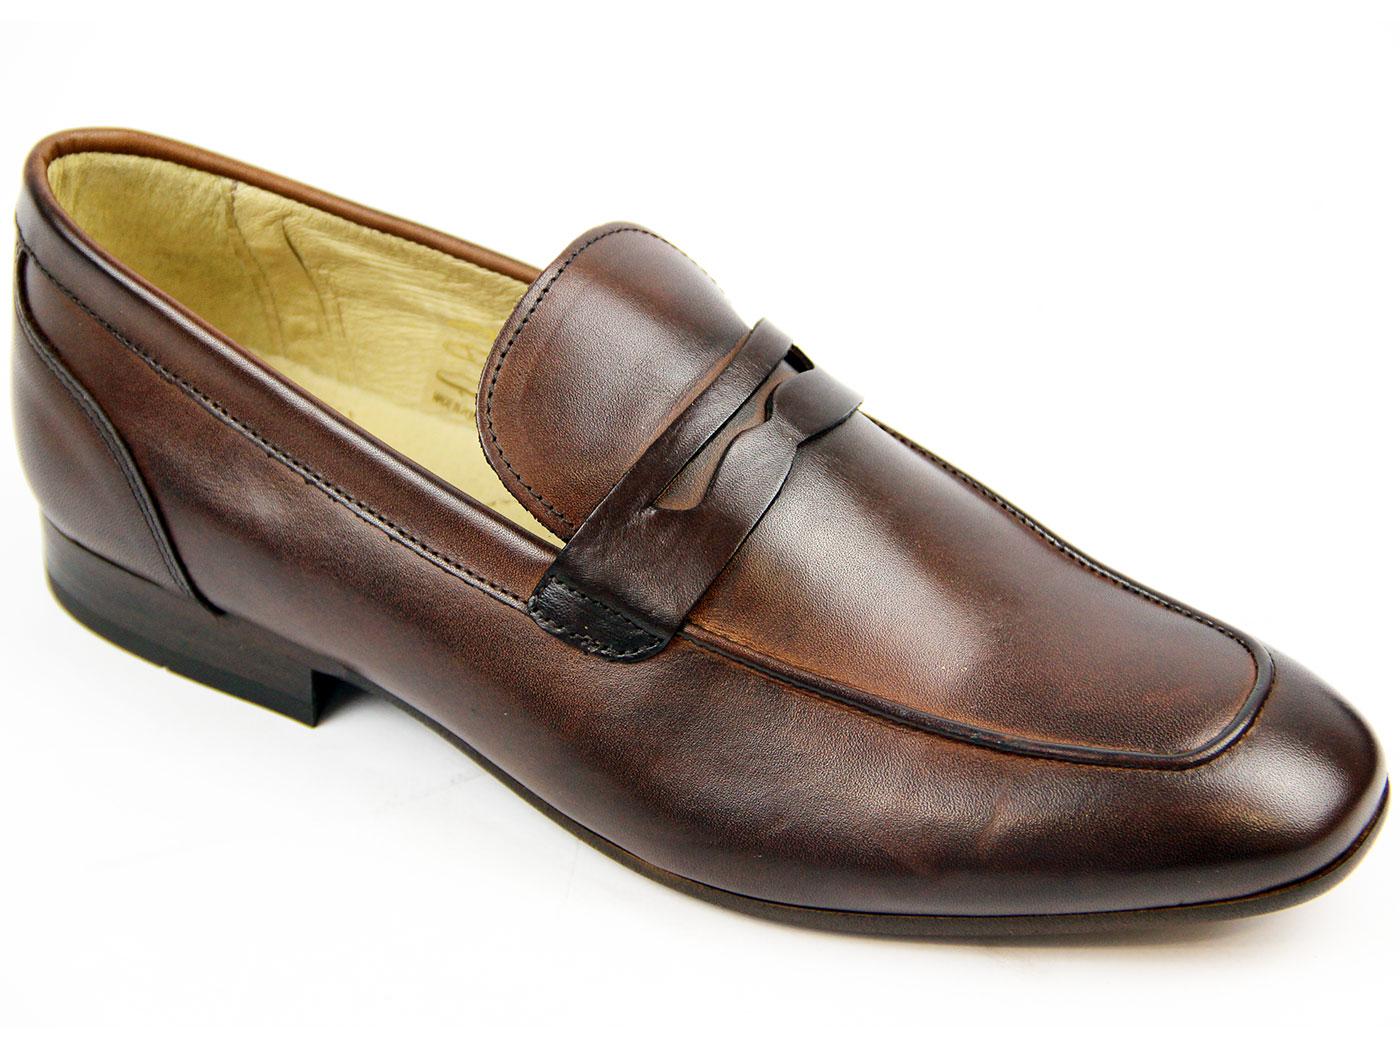 H by HUDSON Reyes Retro 60s Mod Leather Saddle Loafers in Brown